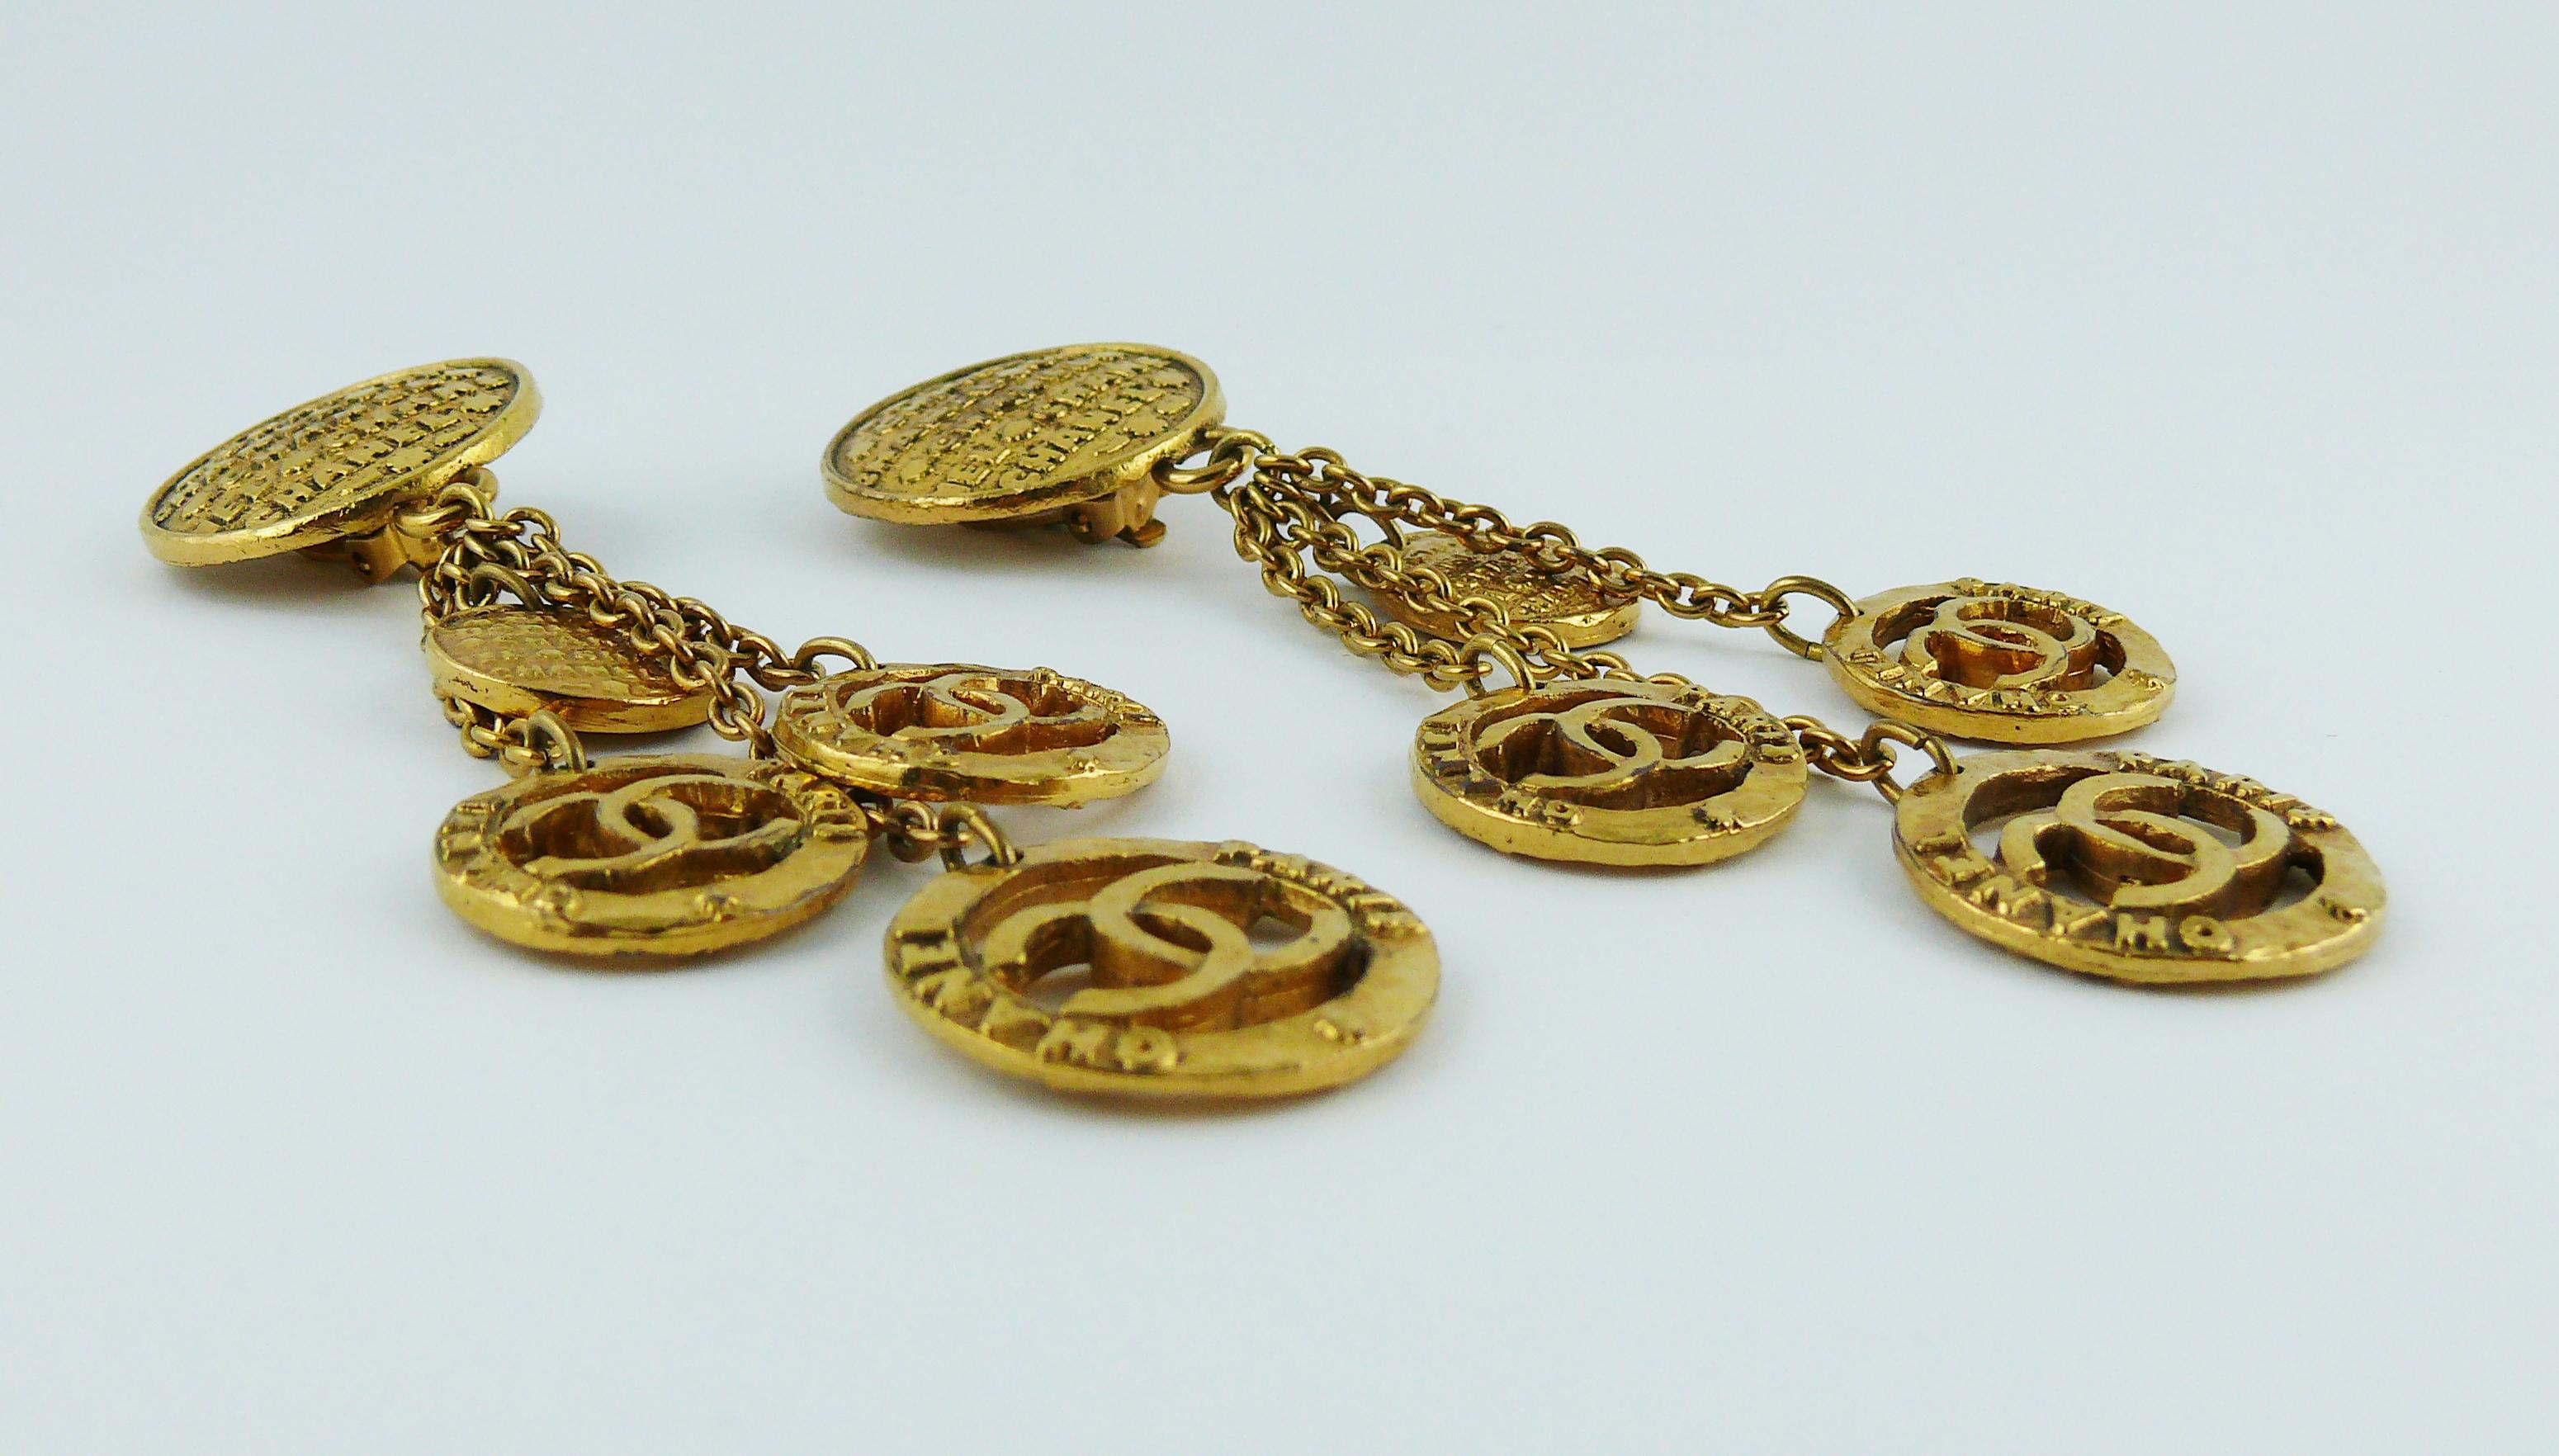 CHANEL vintage gold toned dangling earrings (clip-on) featuring multi coin charms with CC cut-out logos.

Collection year : 1993.

Embossed CHANEL 2 8 Made in France.

Indicative measurements : height approx. 10.5 cm (4.13 inches) / max. width